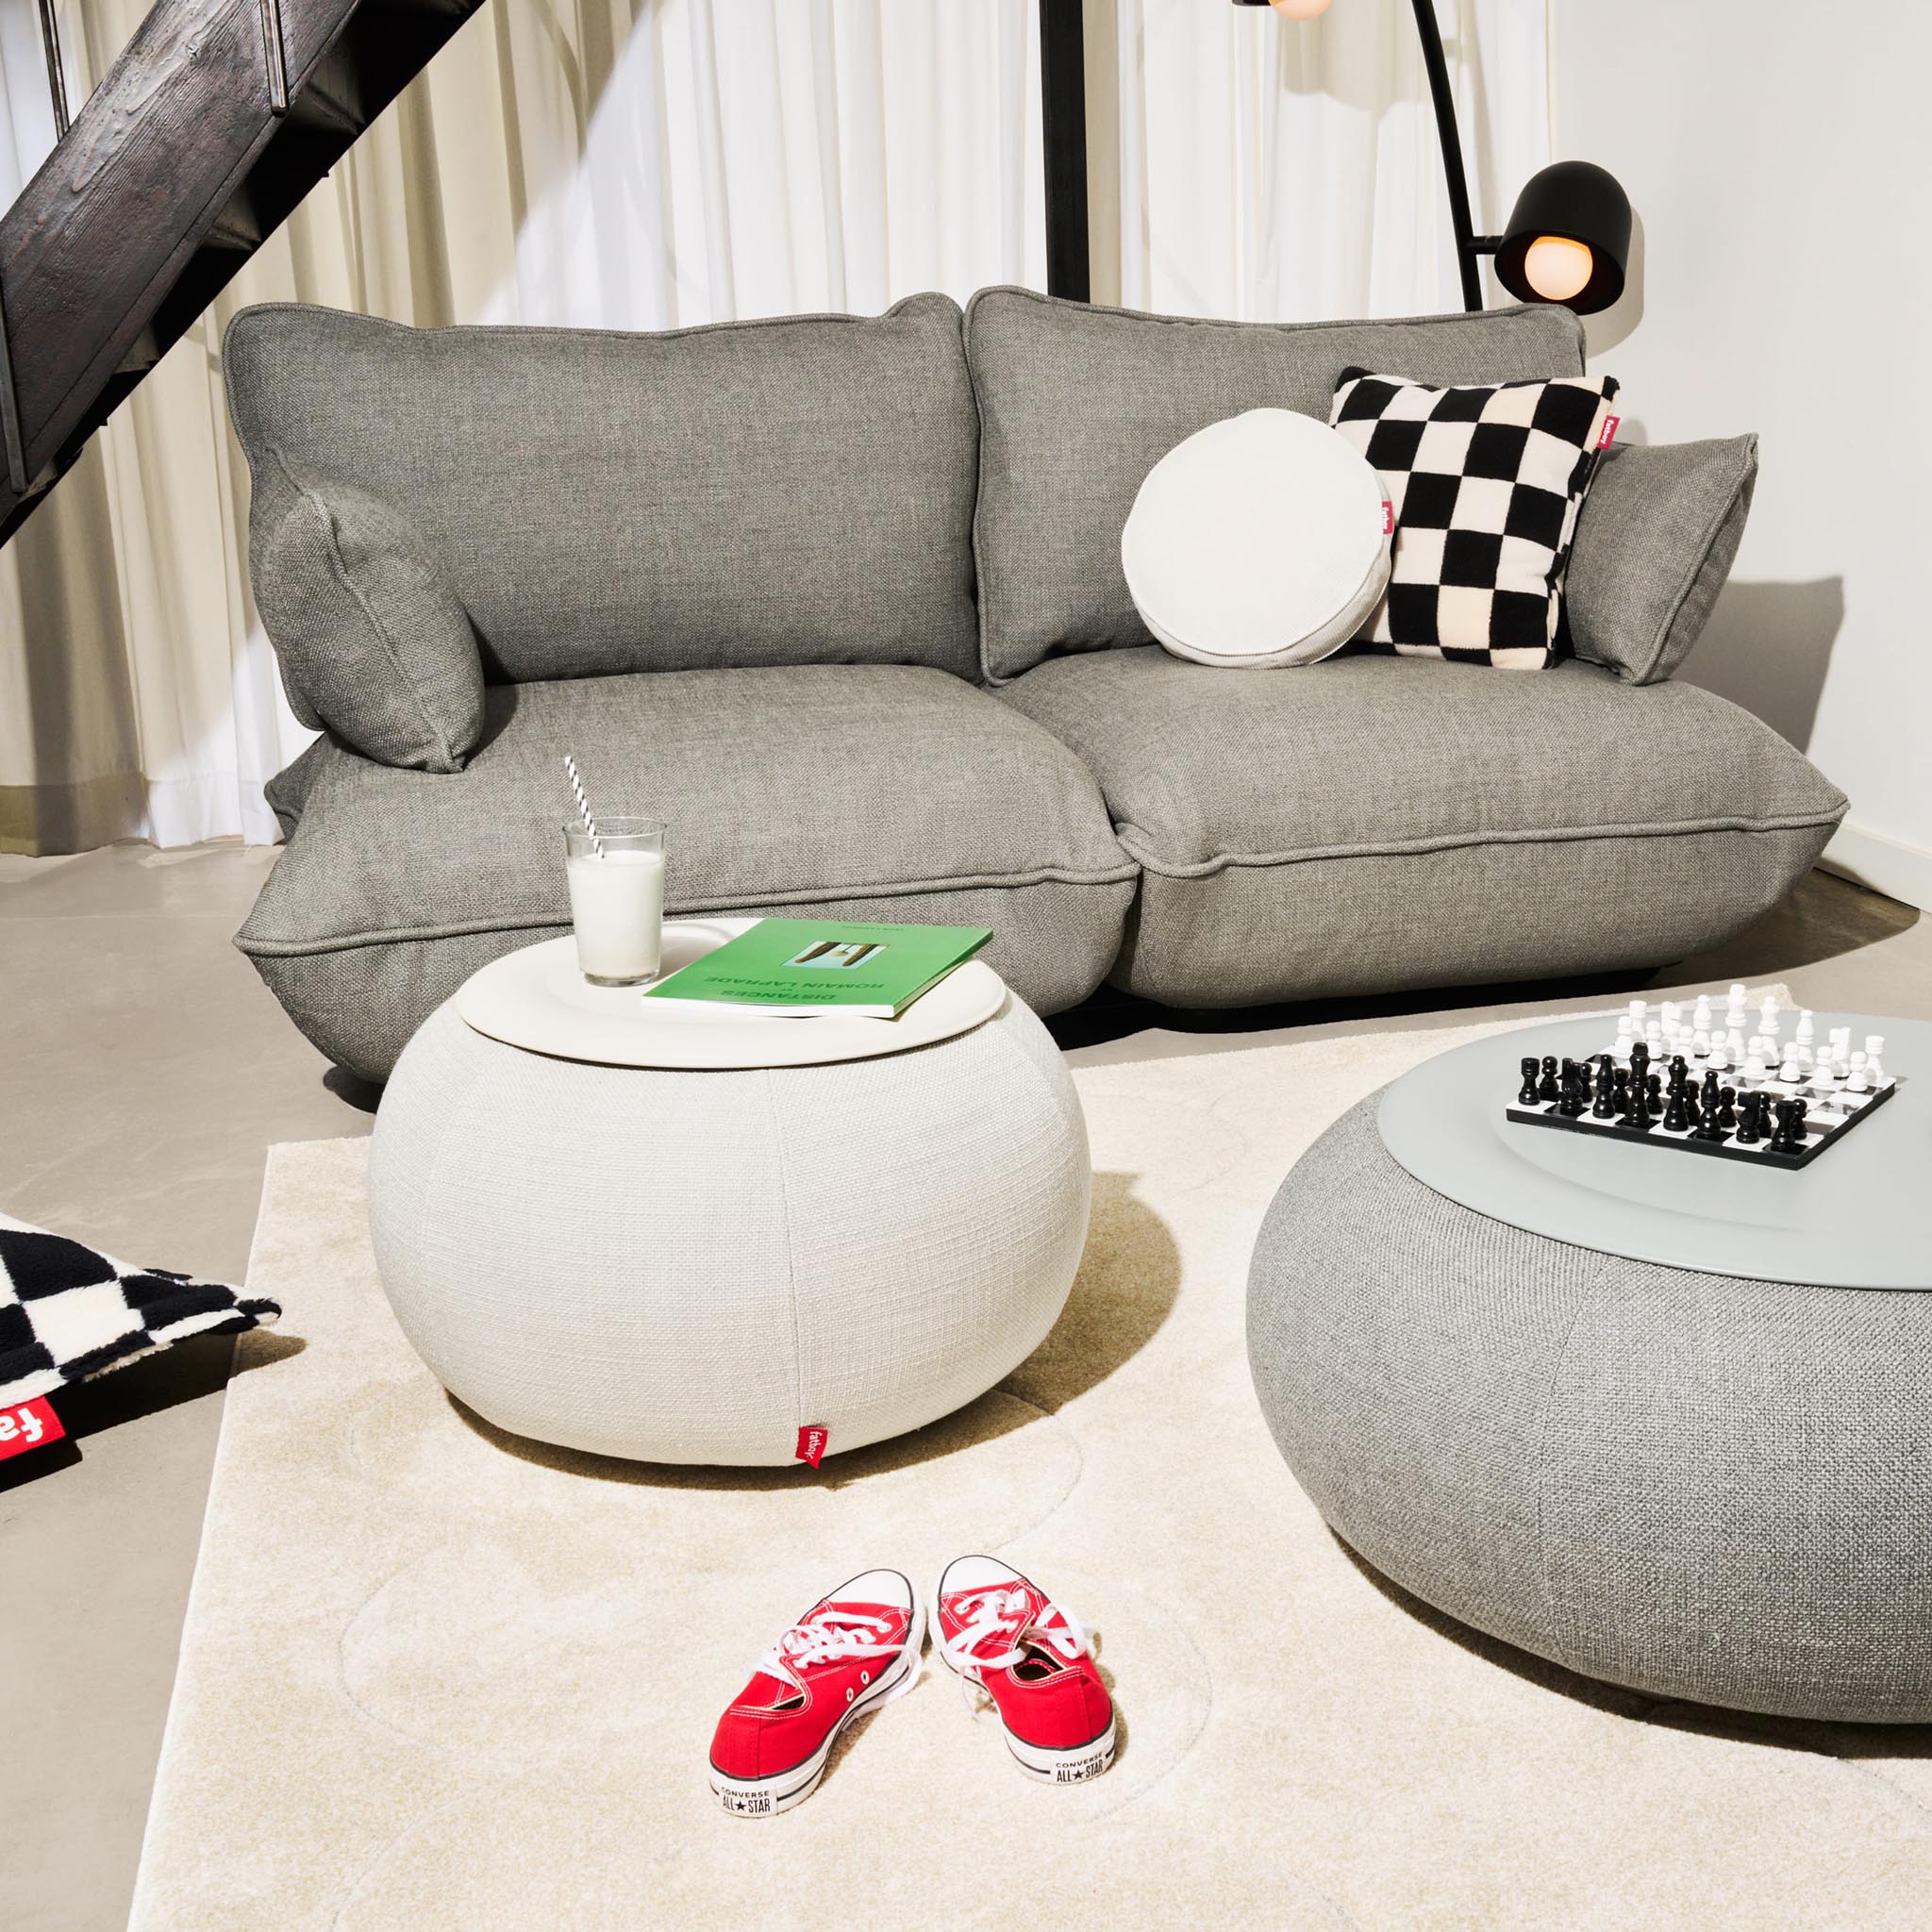 Fatboy Bubble Carpet: sensory delight, playful design, suits living areas and bedrooms.